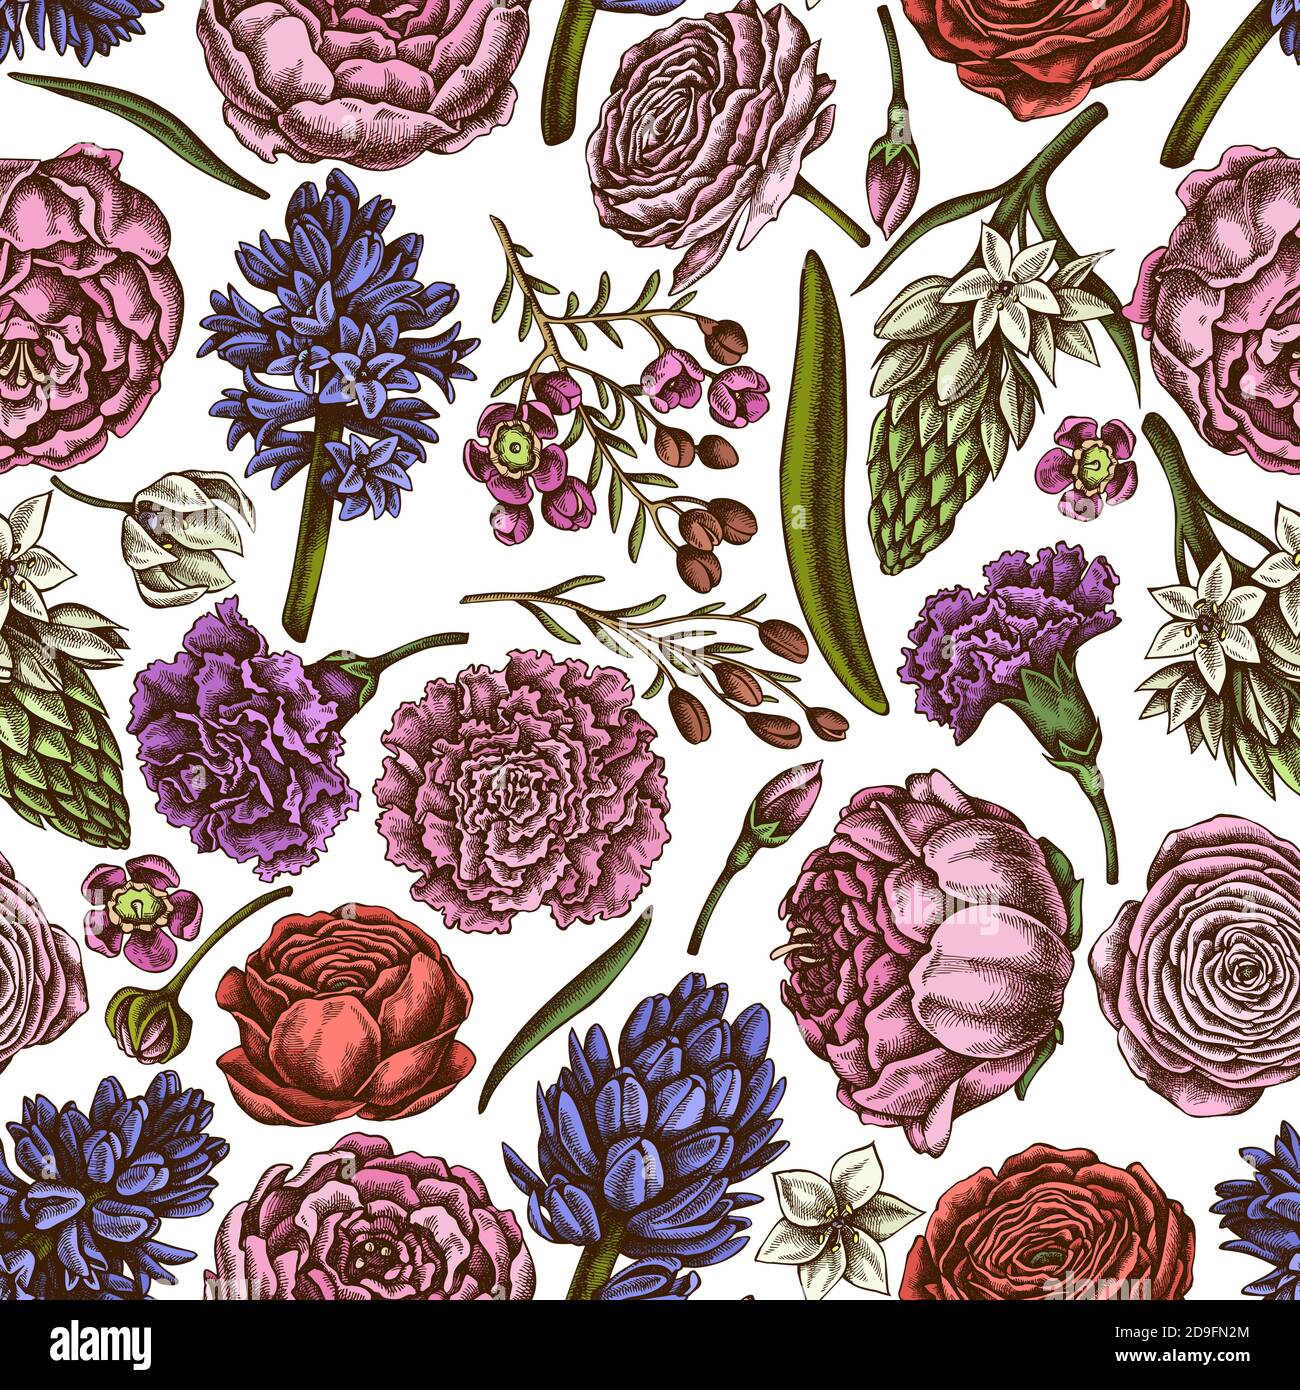 Seamless pattern with hand drawn colored peony, carnation, ranunculus, wax flower, ornithogalum, hyacinth Stock Vector